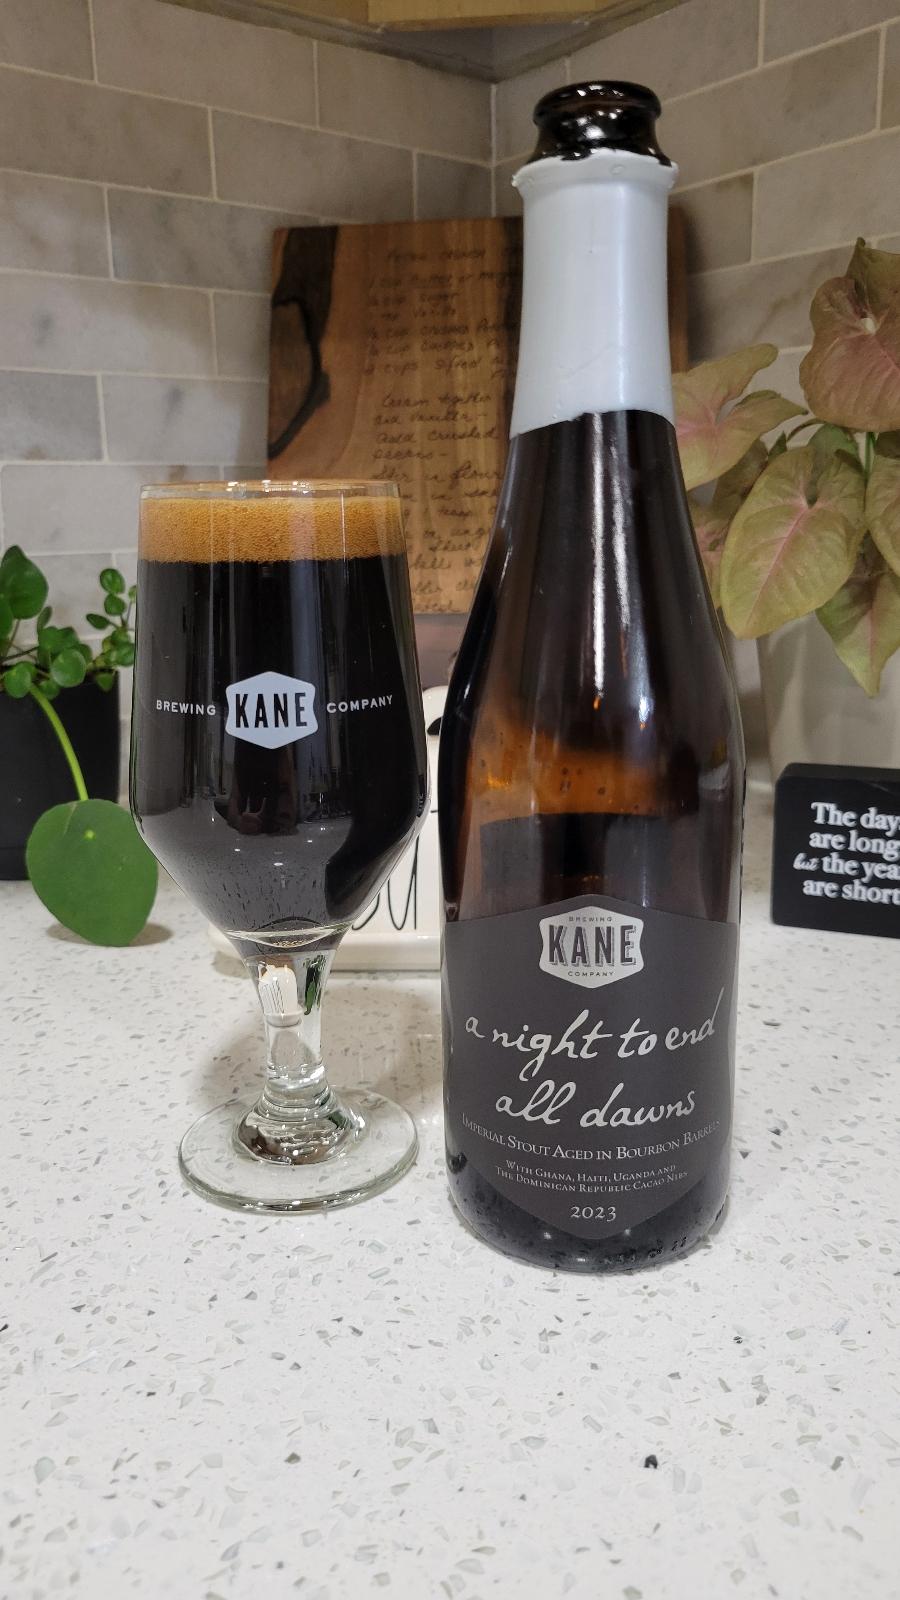 A Night To End All Dawns with Quadruple Chocolate (2023 Bourbon Barrel Aged)